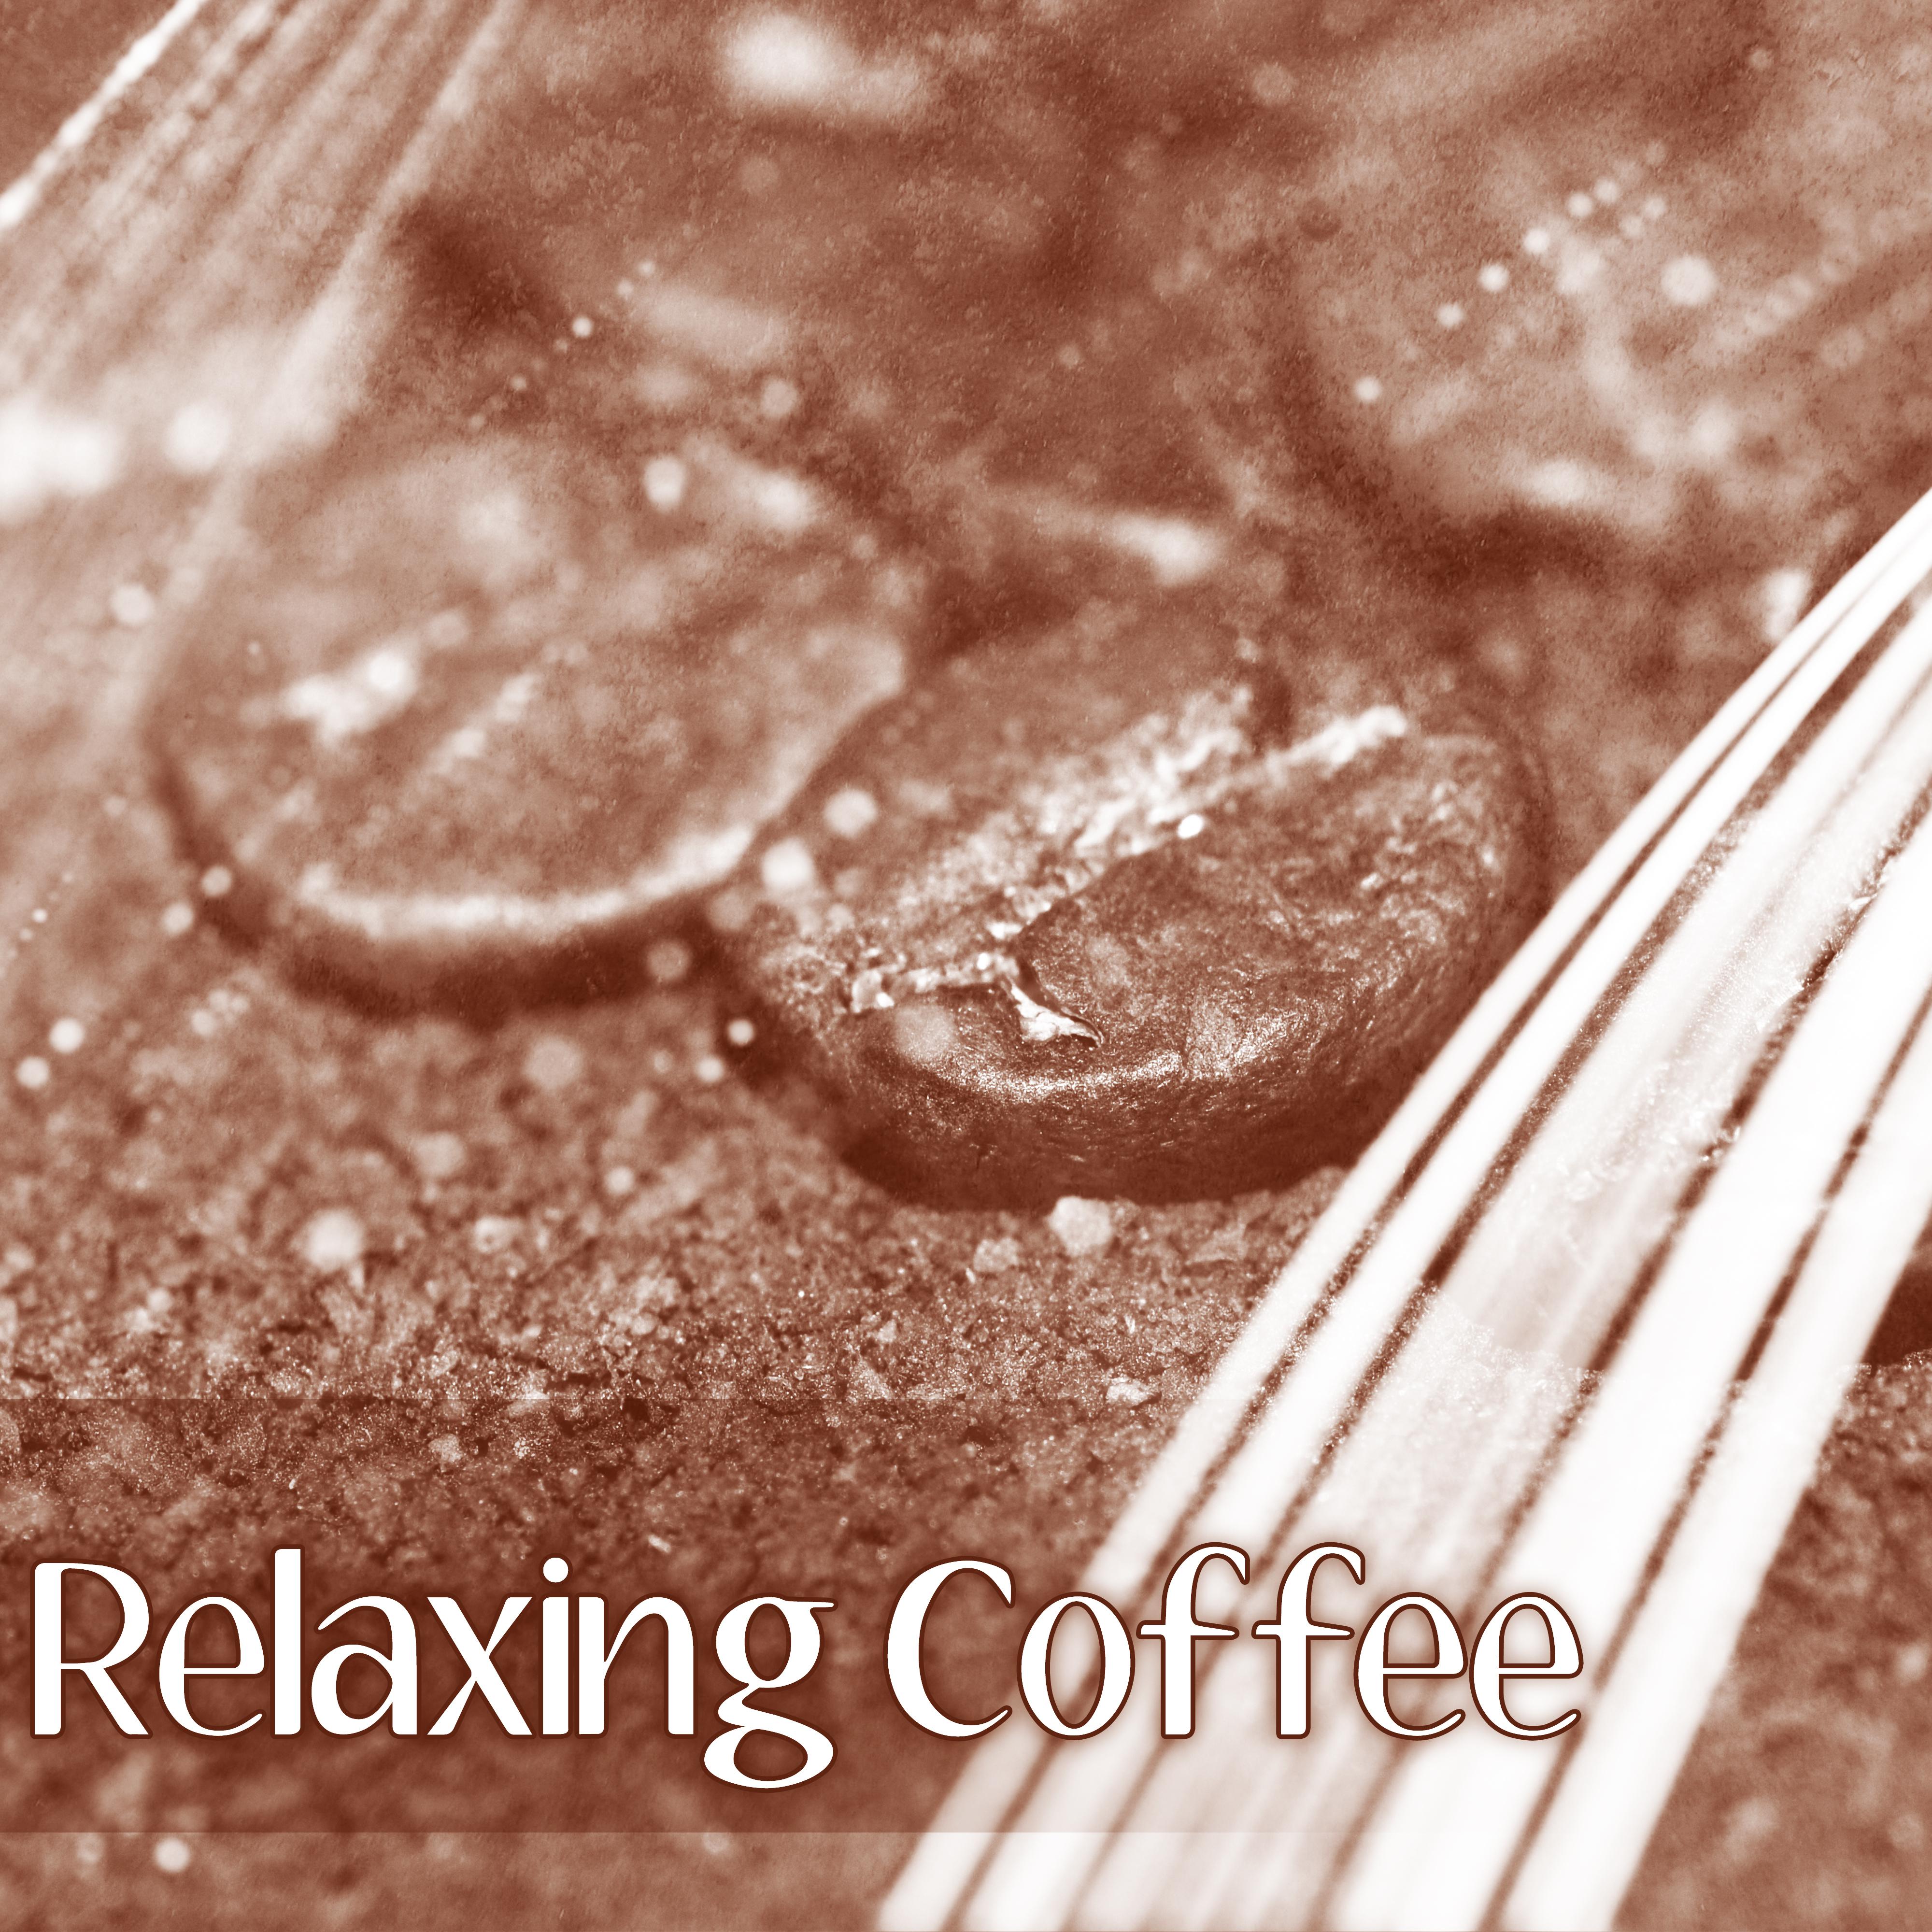 Relaxing Coffee  Restaurant Jazz Music, Deep Relax, Instrumental Sounds, Smooth Jazz, Chillout with Jazz, Soothing Piano